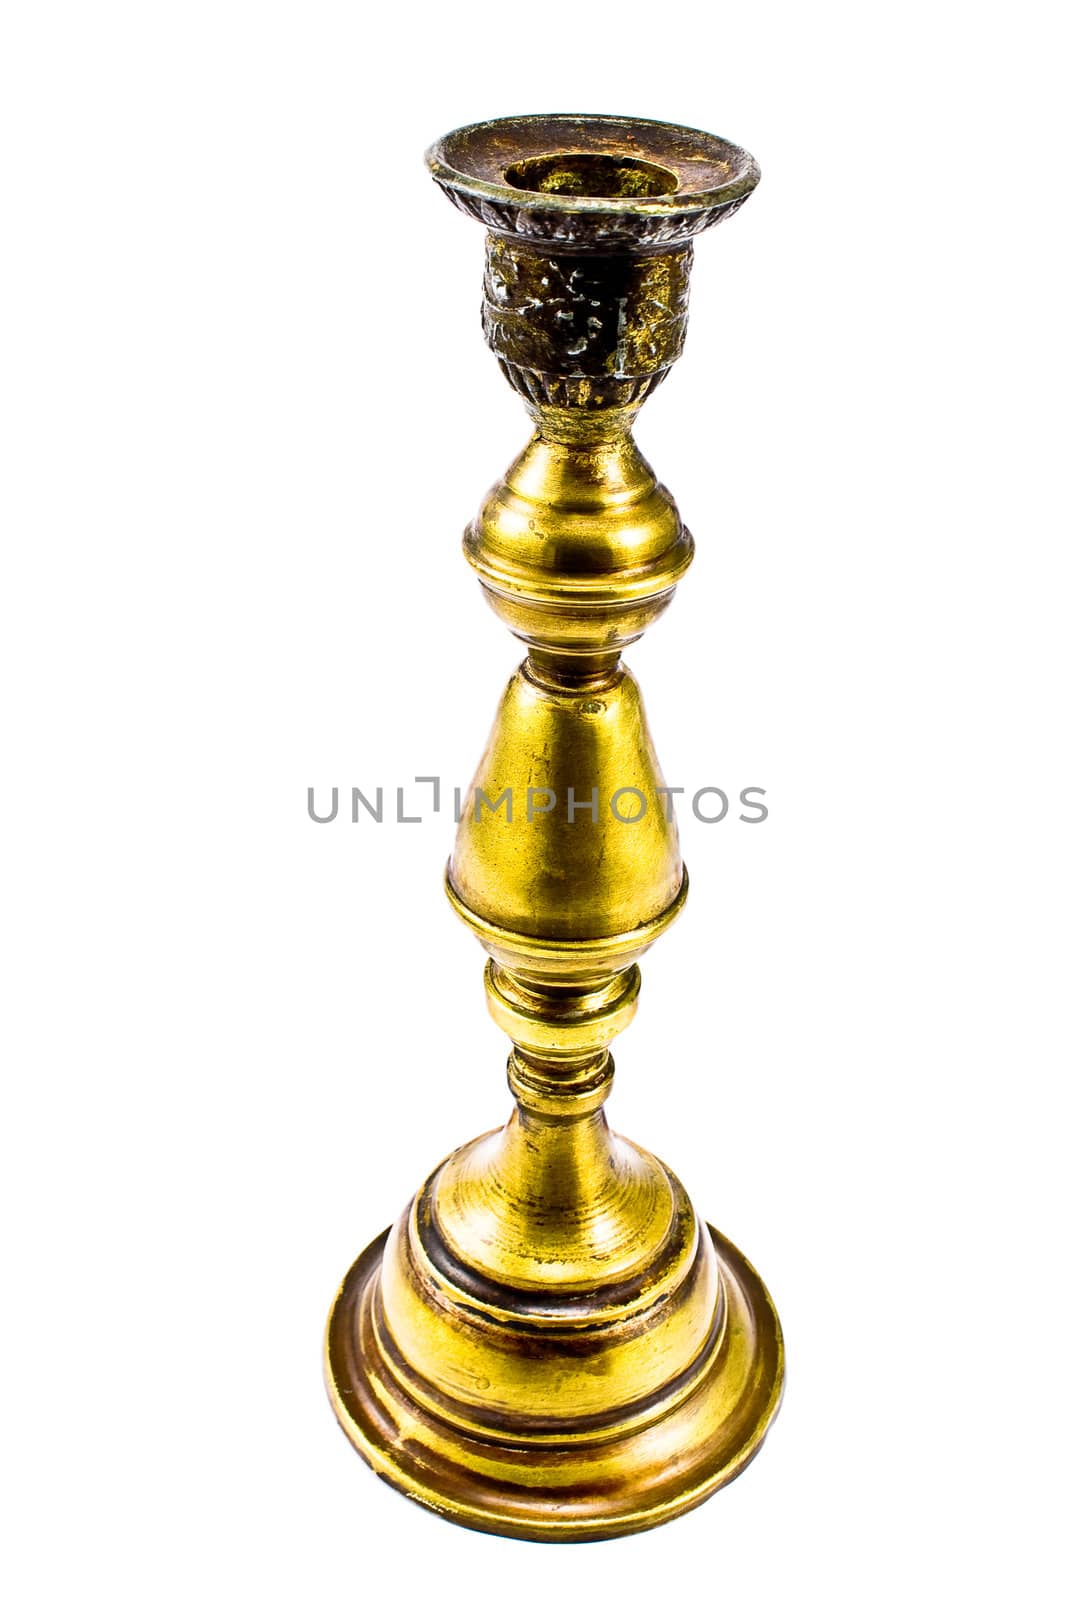 Antique brass candlestick isolated on white